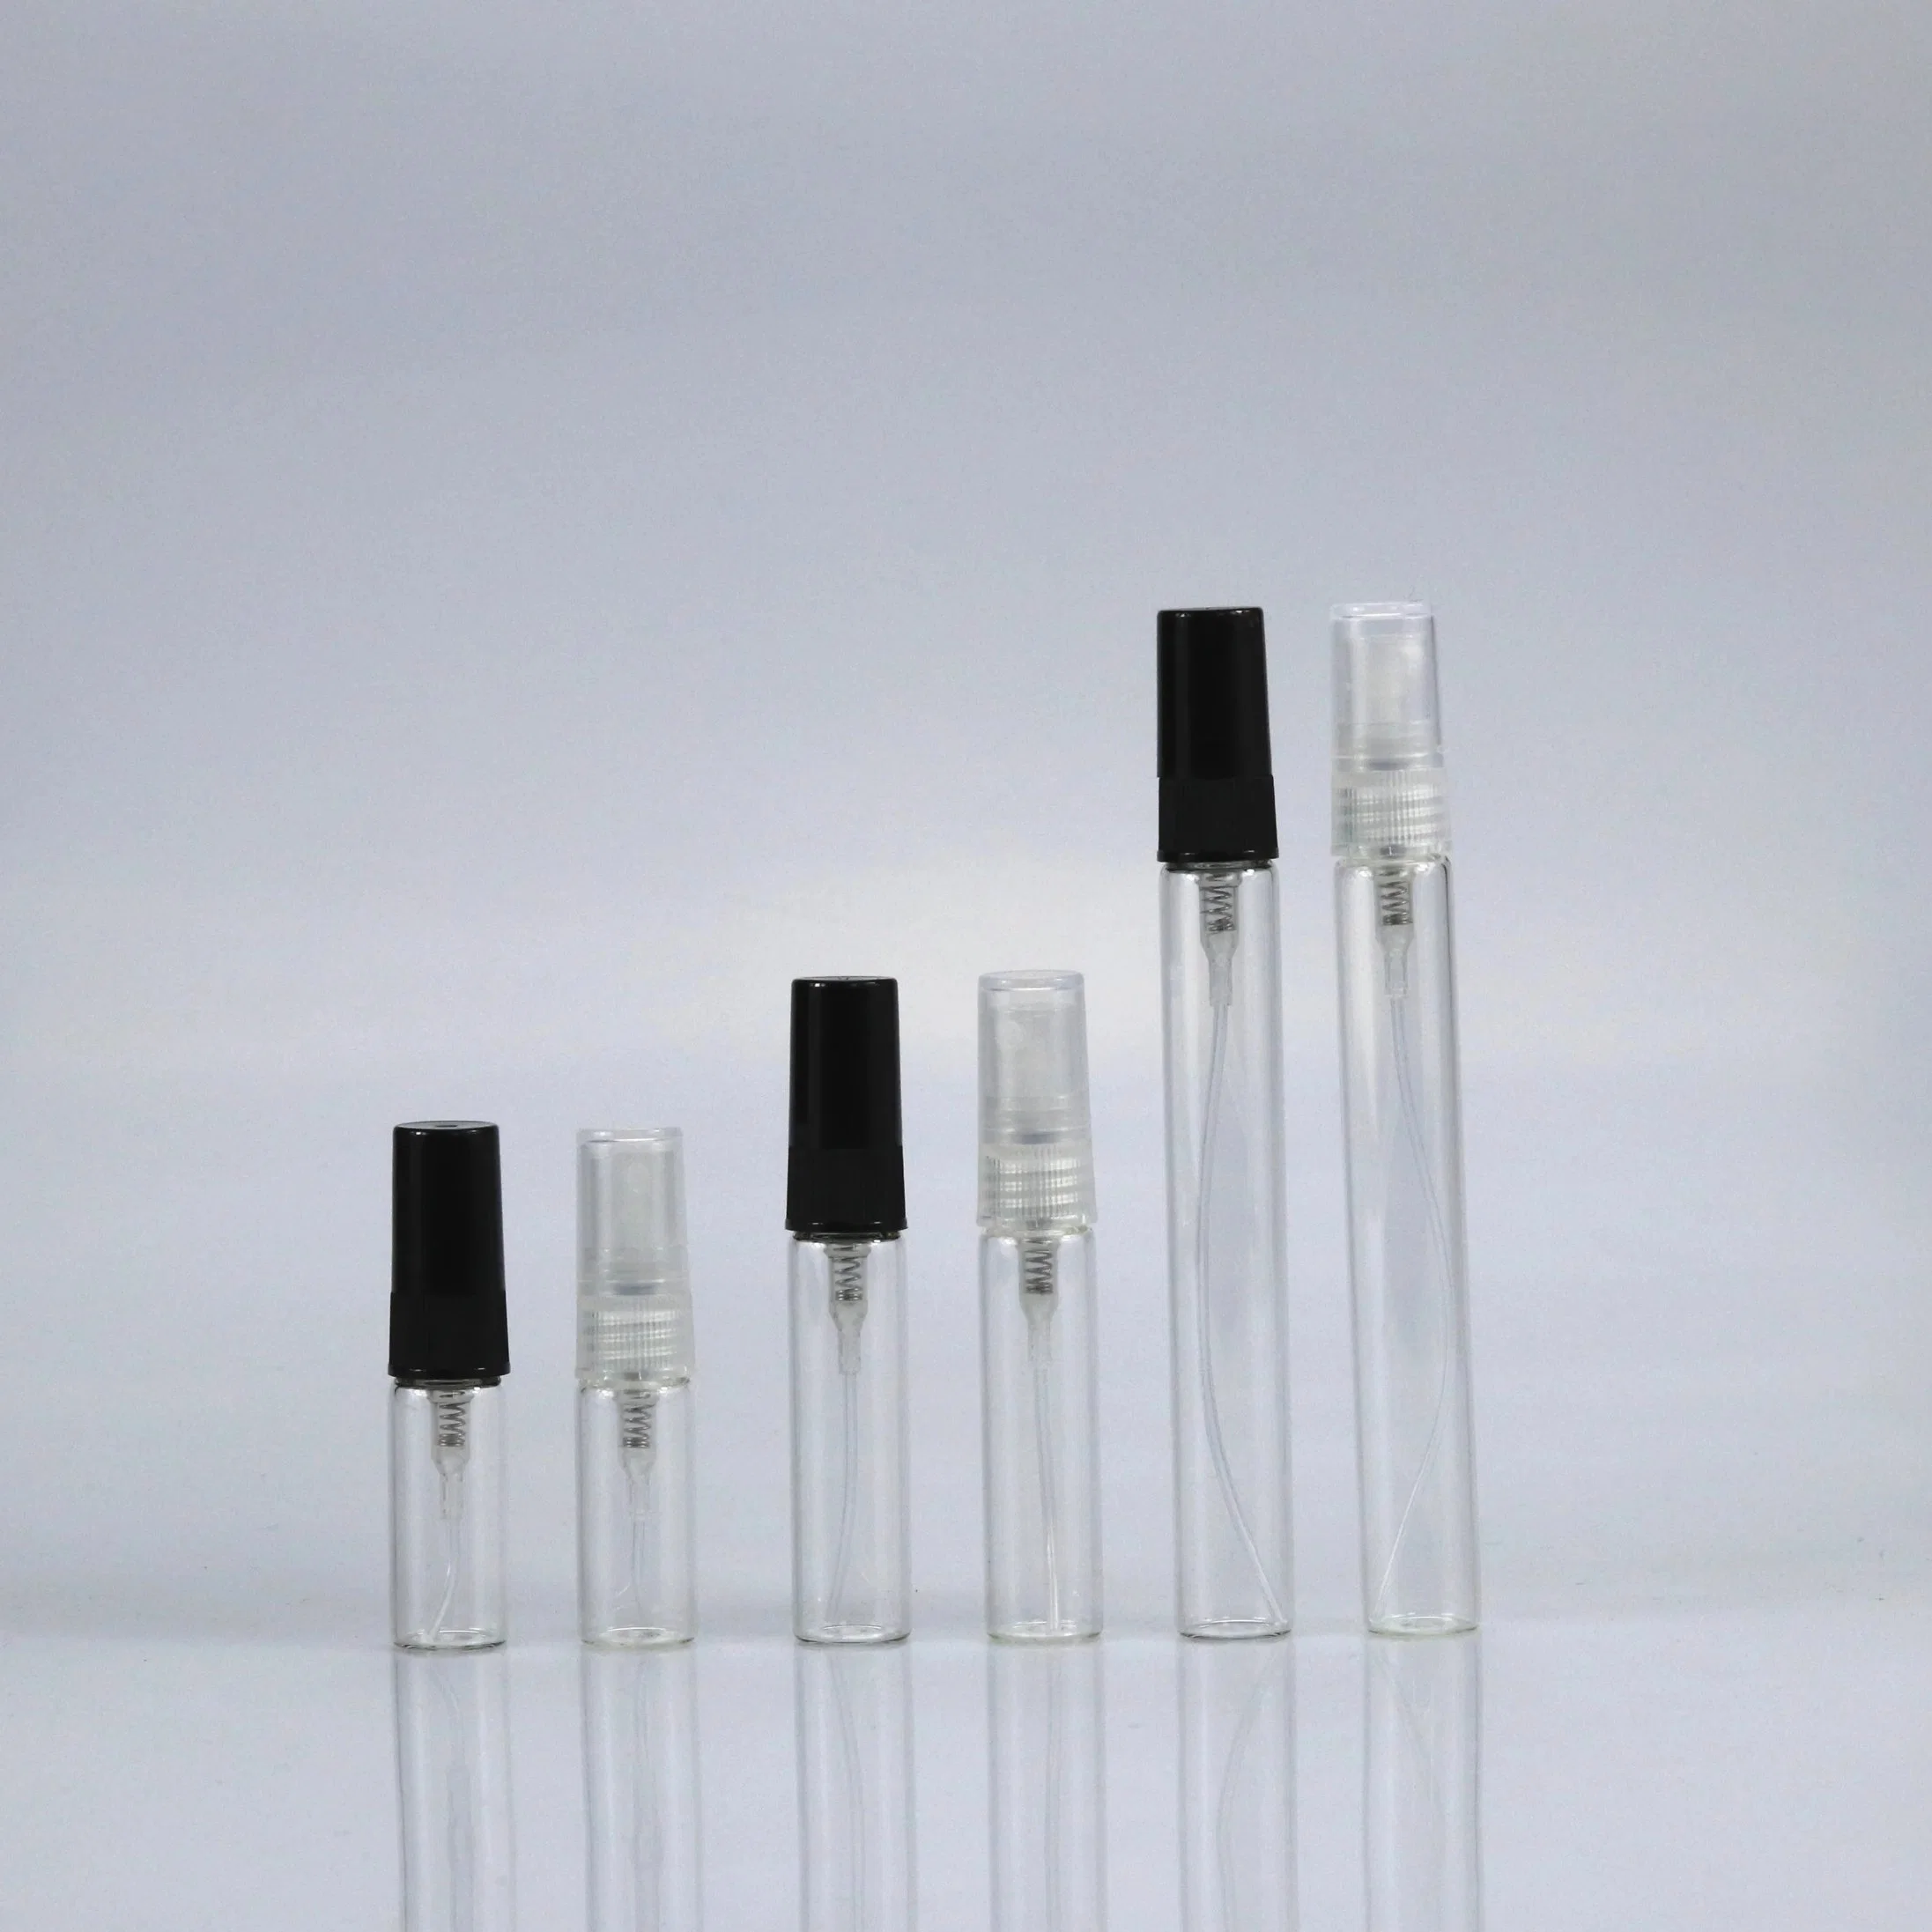 New Style 2ml 3ml 5ml 10ml All Clear Glass Perfume Bottles Travel Spray Sample Bottle Cosmetic Packaging with Pump